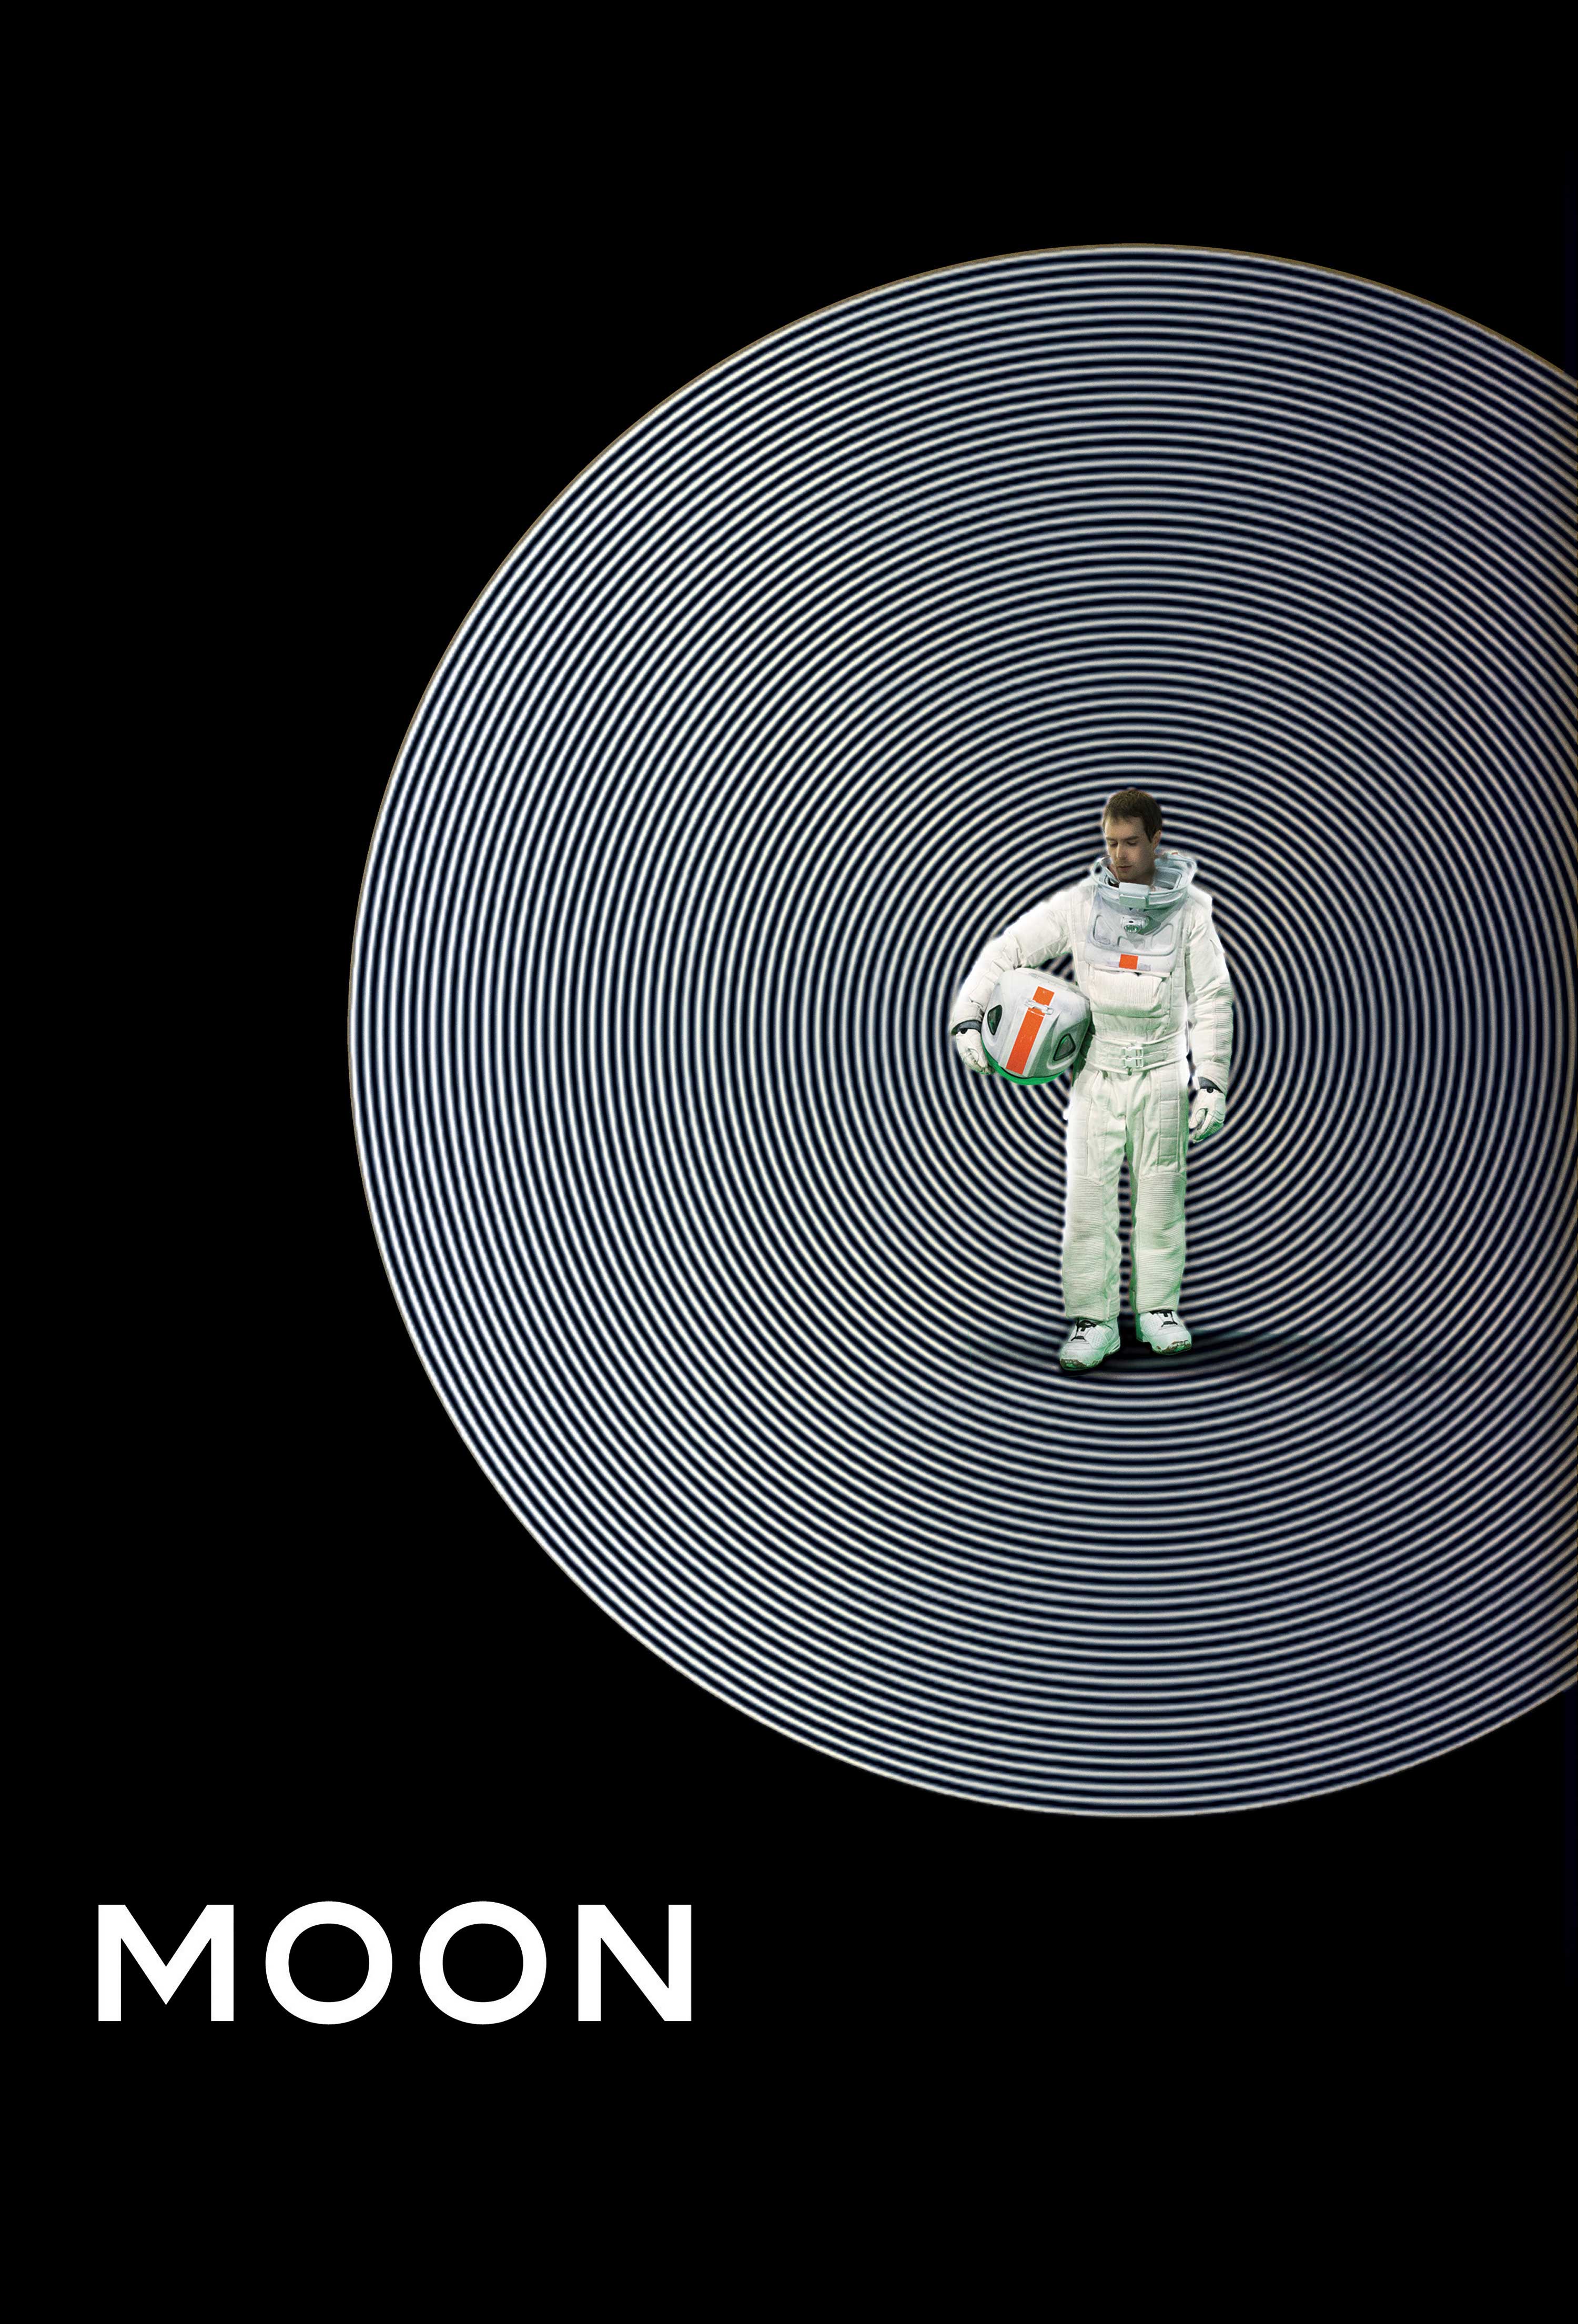 Win A Poster Signed By Duncan Jones To Celebrate MOON’s 5th Birthday